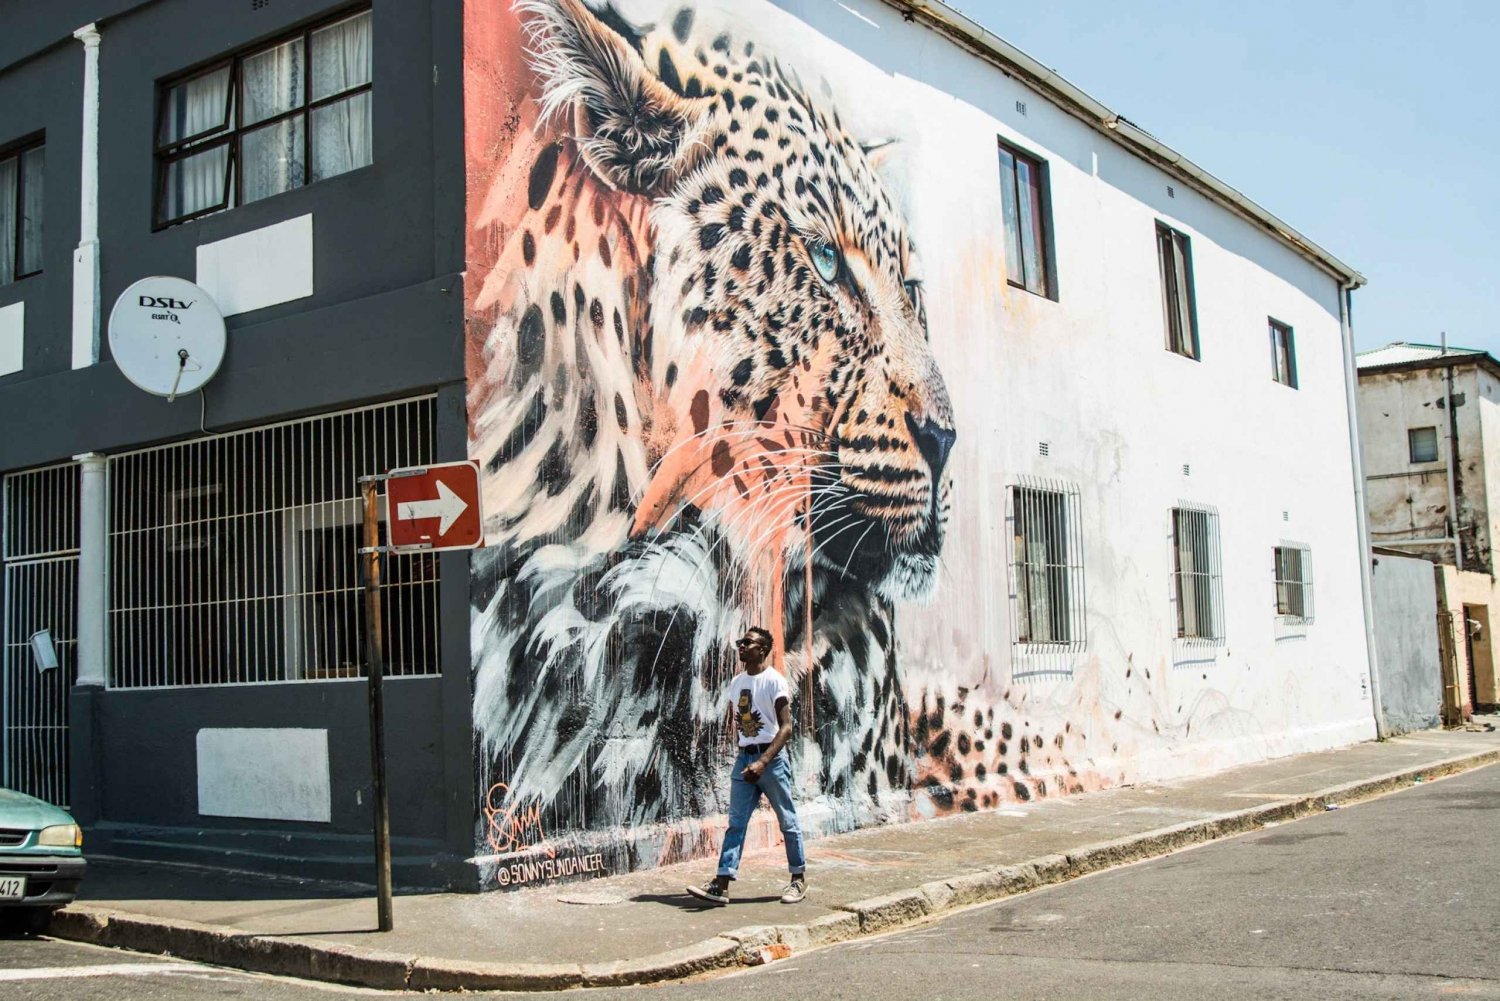 Cape Town: Discover the City's Street Art with a Local Guide